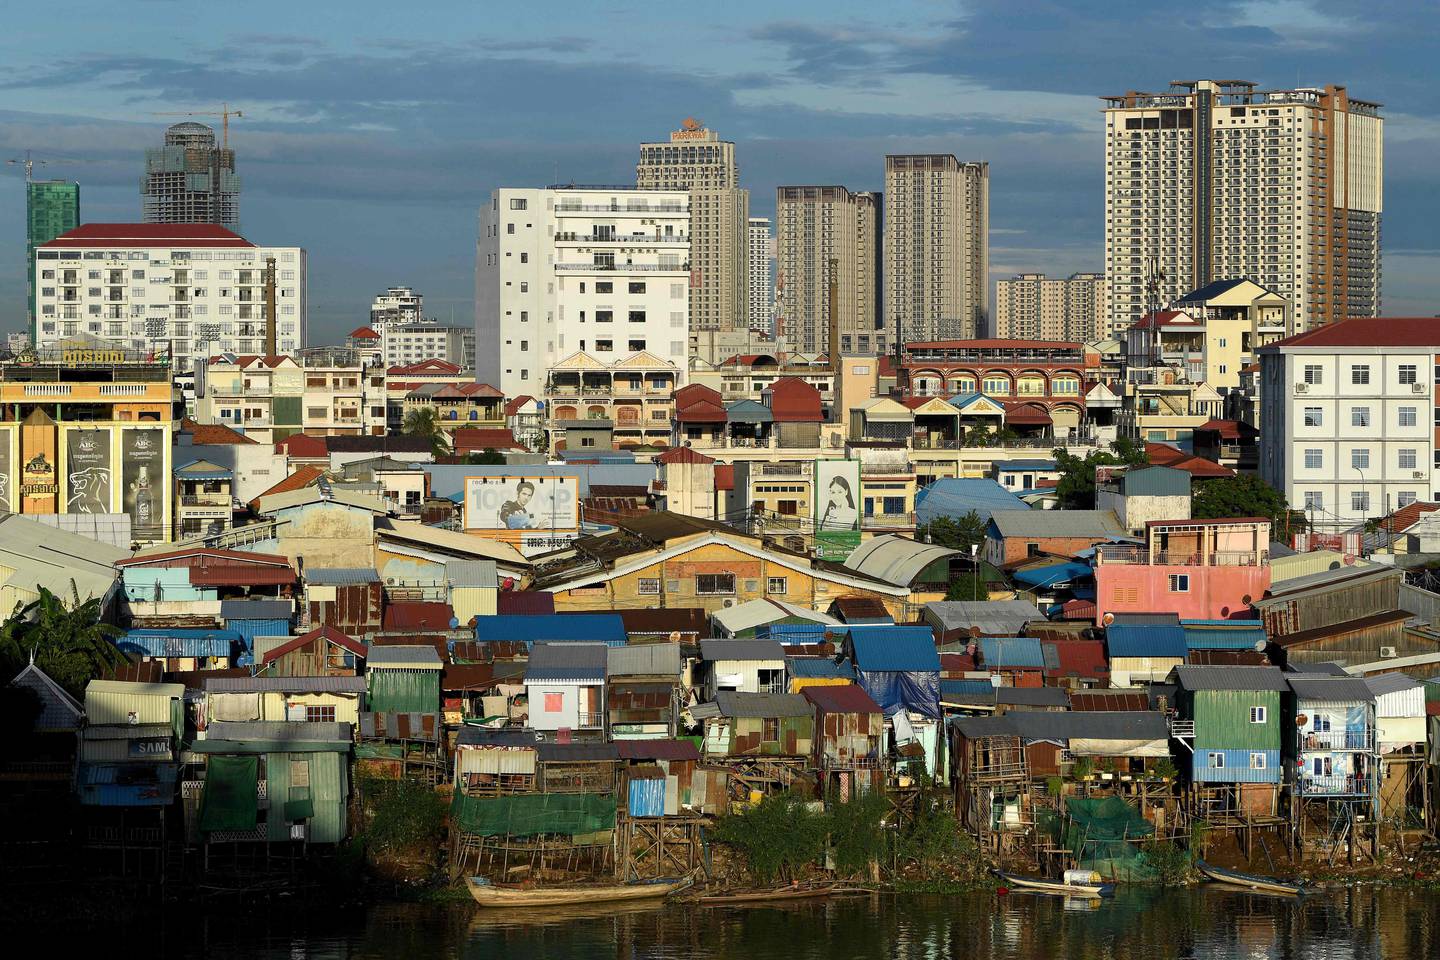 A general view shows a mix of high and low-rise buildings in Phnom Penh. Three decades after a landmark agreement ended years of bloody violence in Cambodia, its strongman ruler has crushed all opposition. AFP